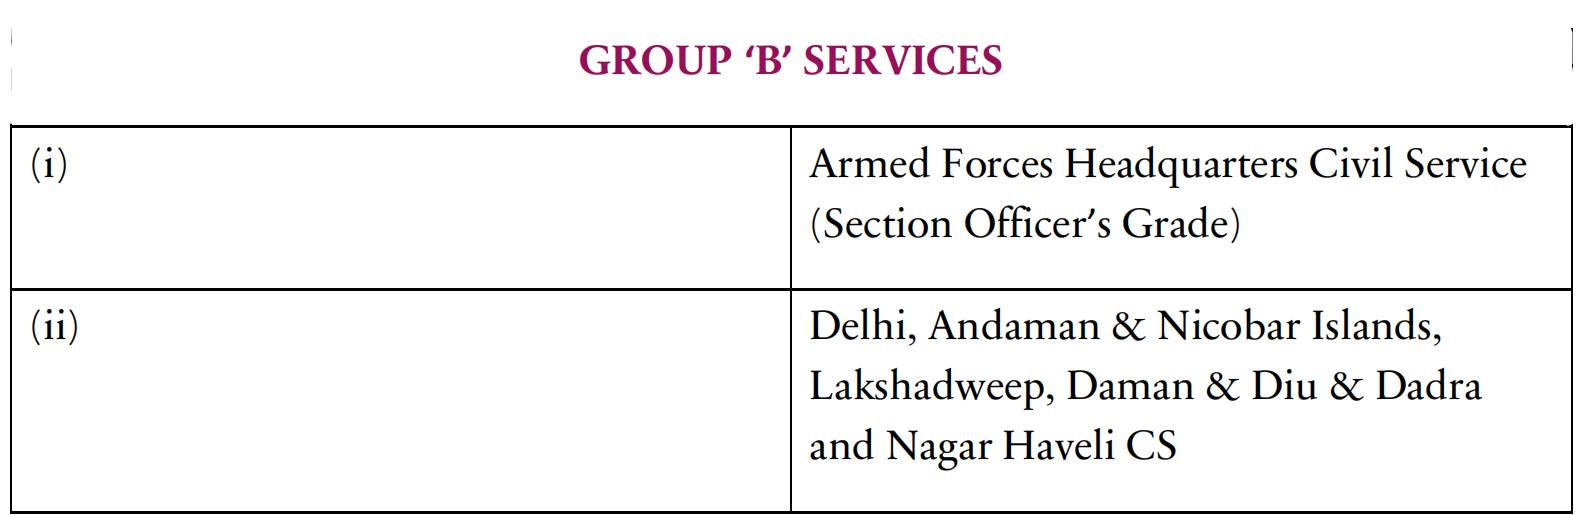 GROUP ‘B’ SERVICES